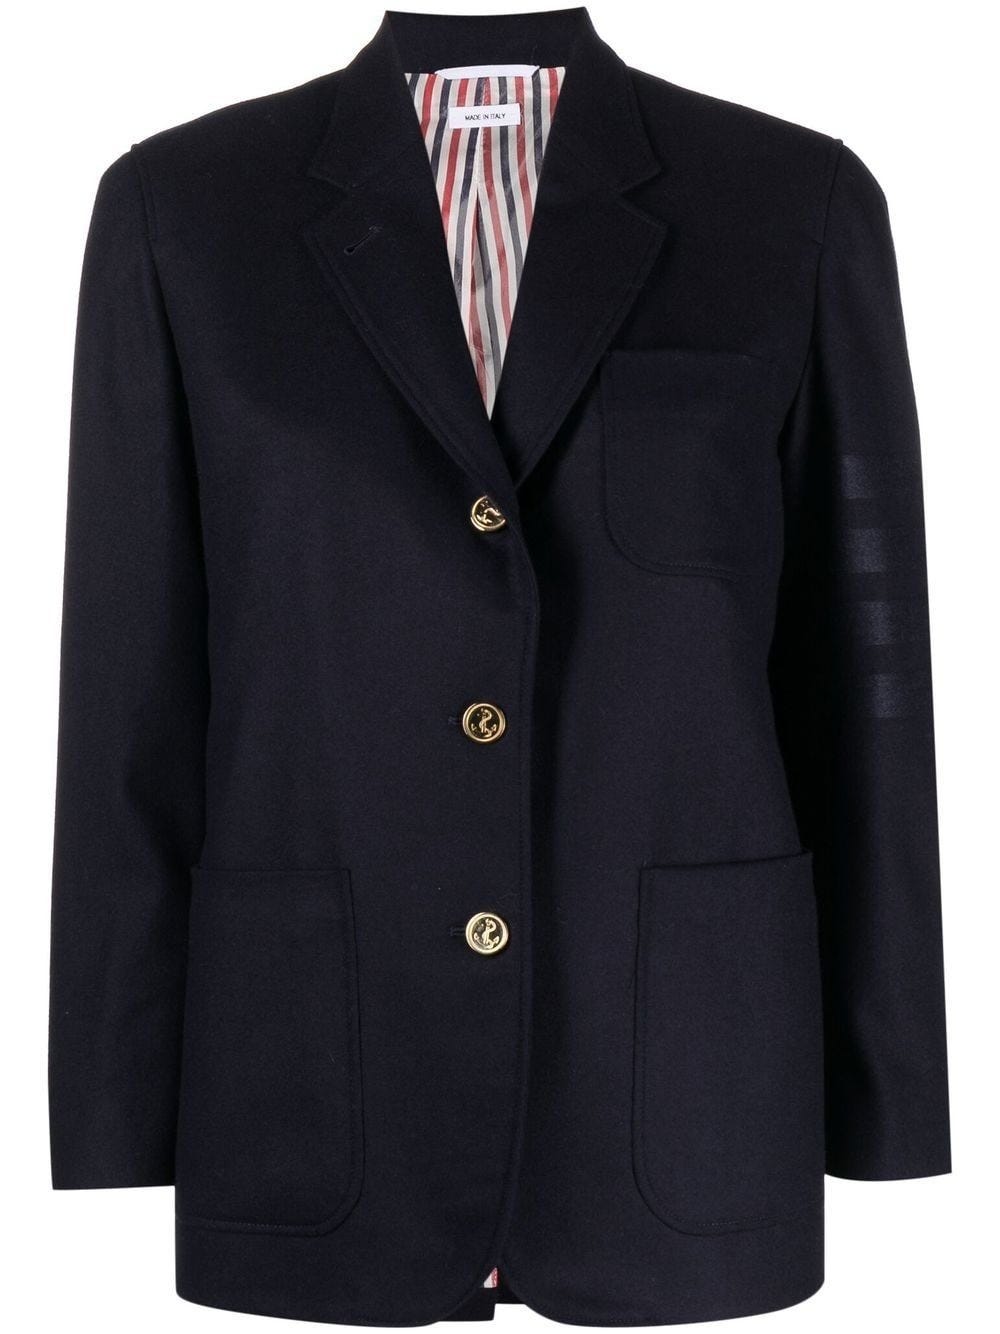 THOM BROWNE BLUE SINGLE-BREASTED BLAZER WITH GOLD BUTTONS